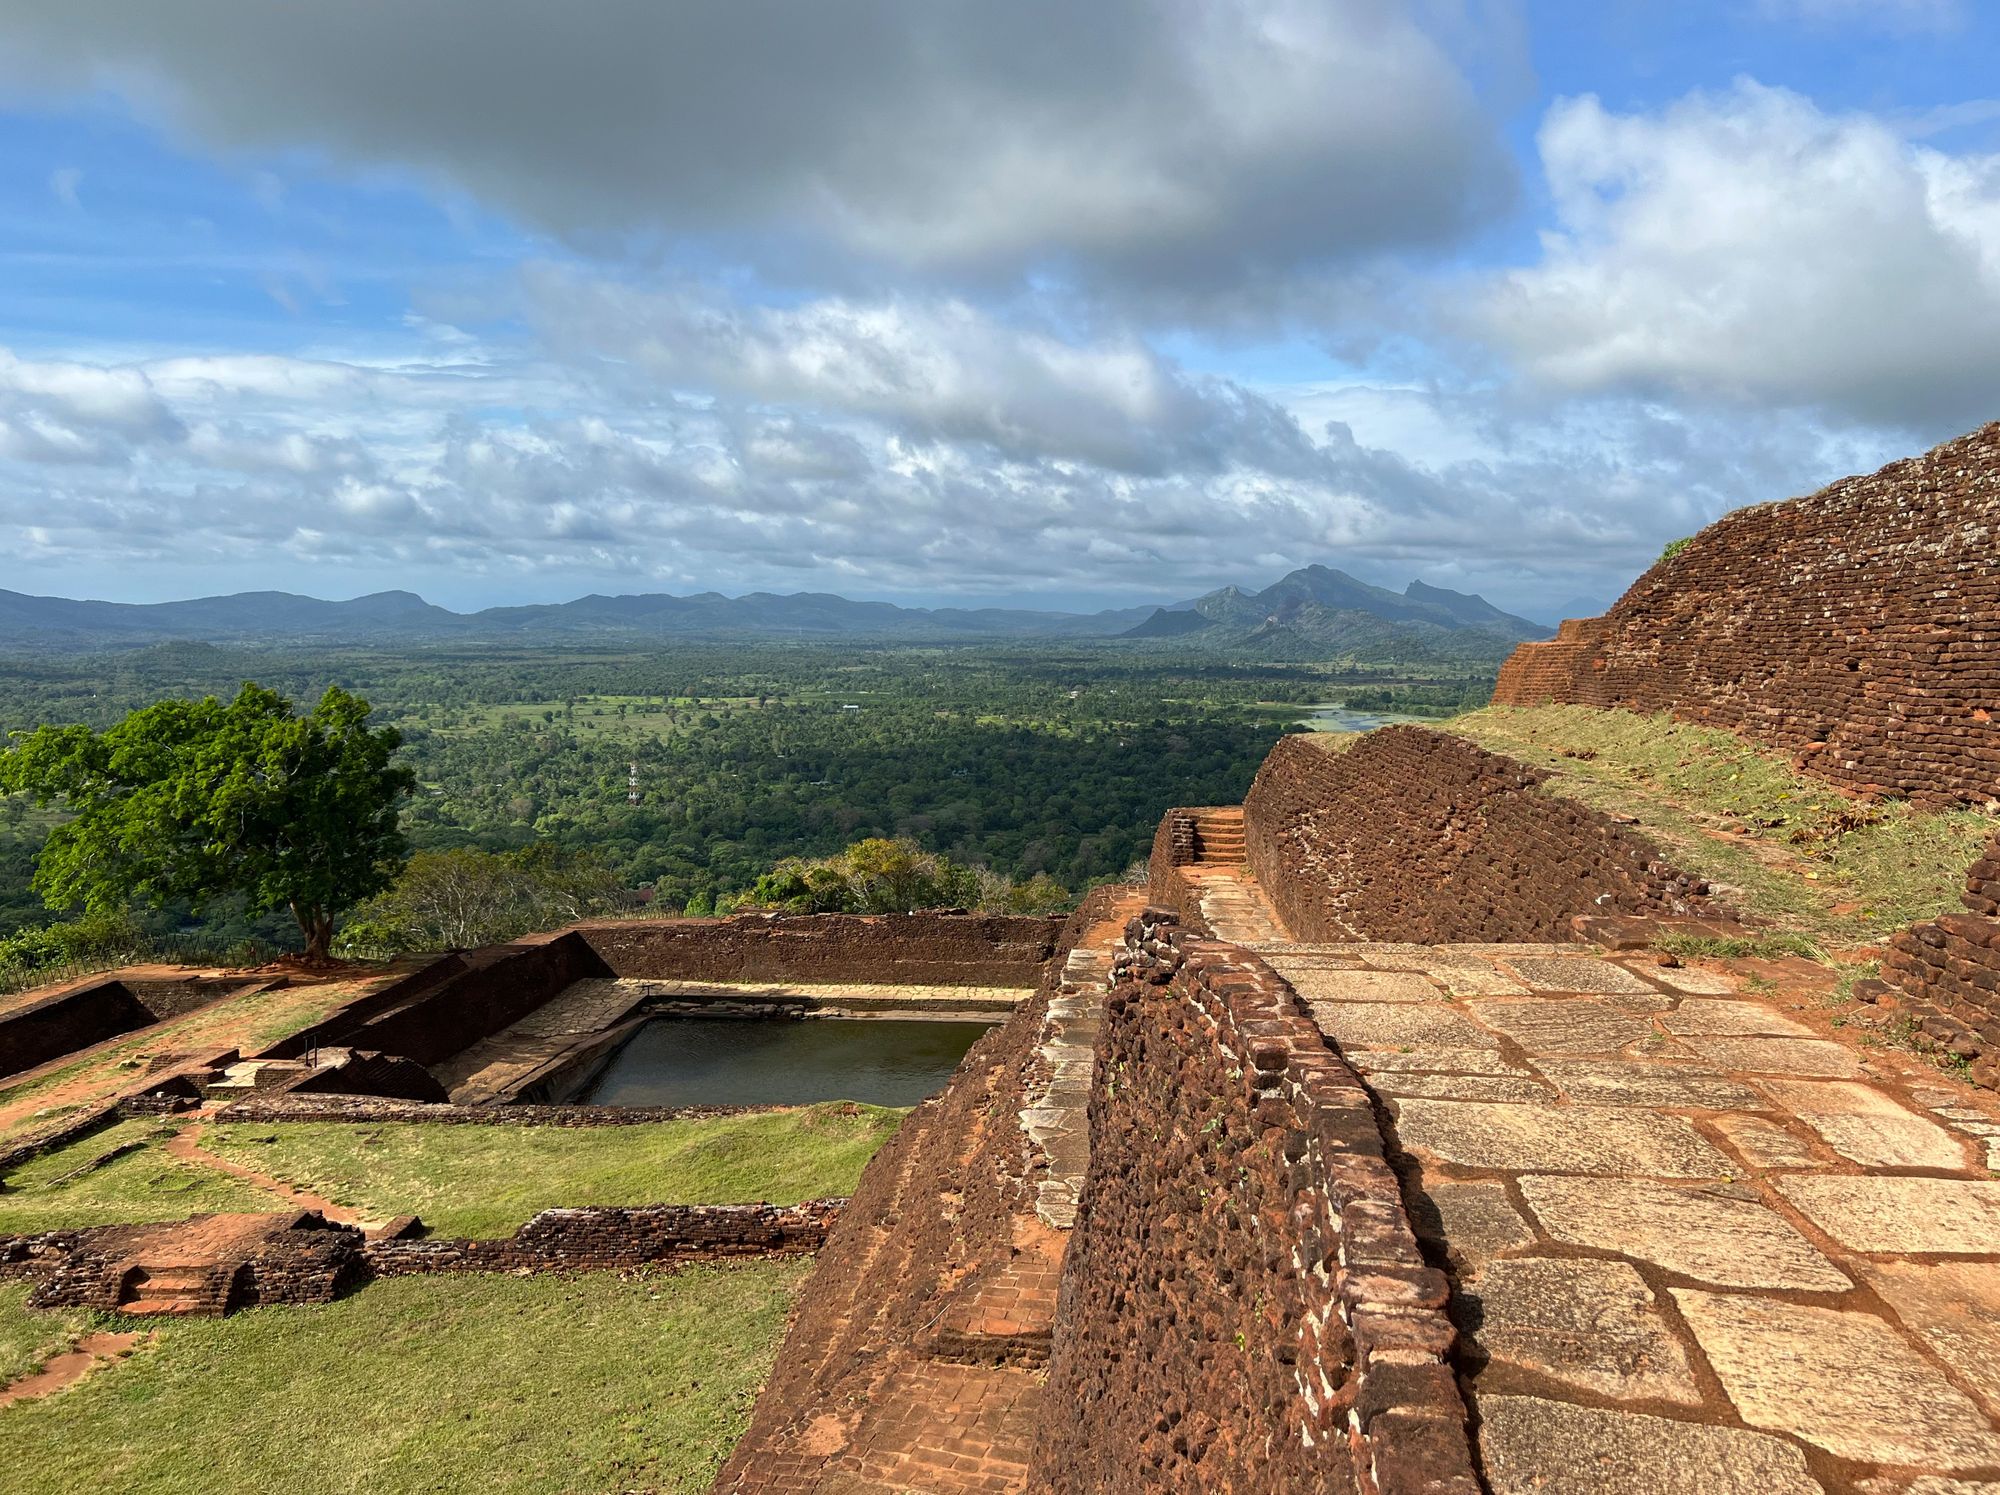 Ruins of the ancient palace in Sigiriya Rock, Sri Lanka, with palace walls and a water pond in sight.